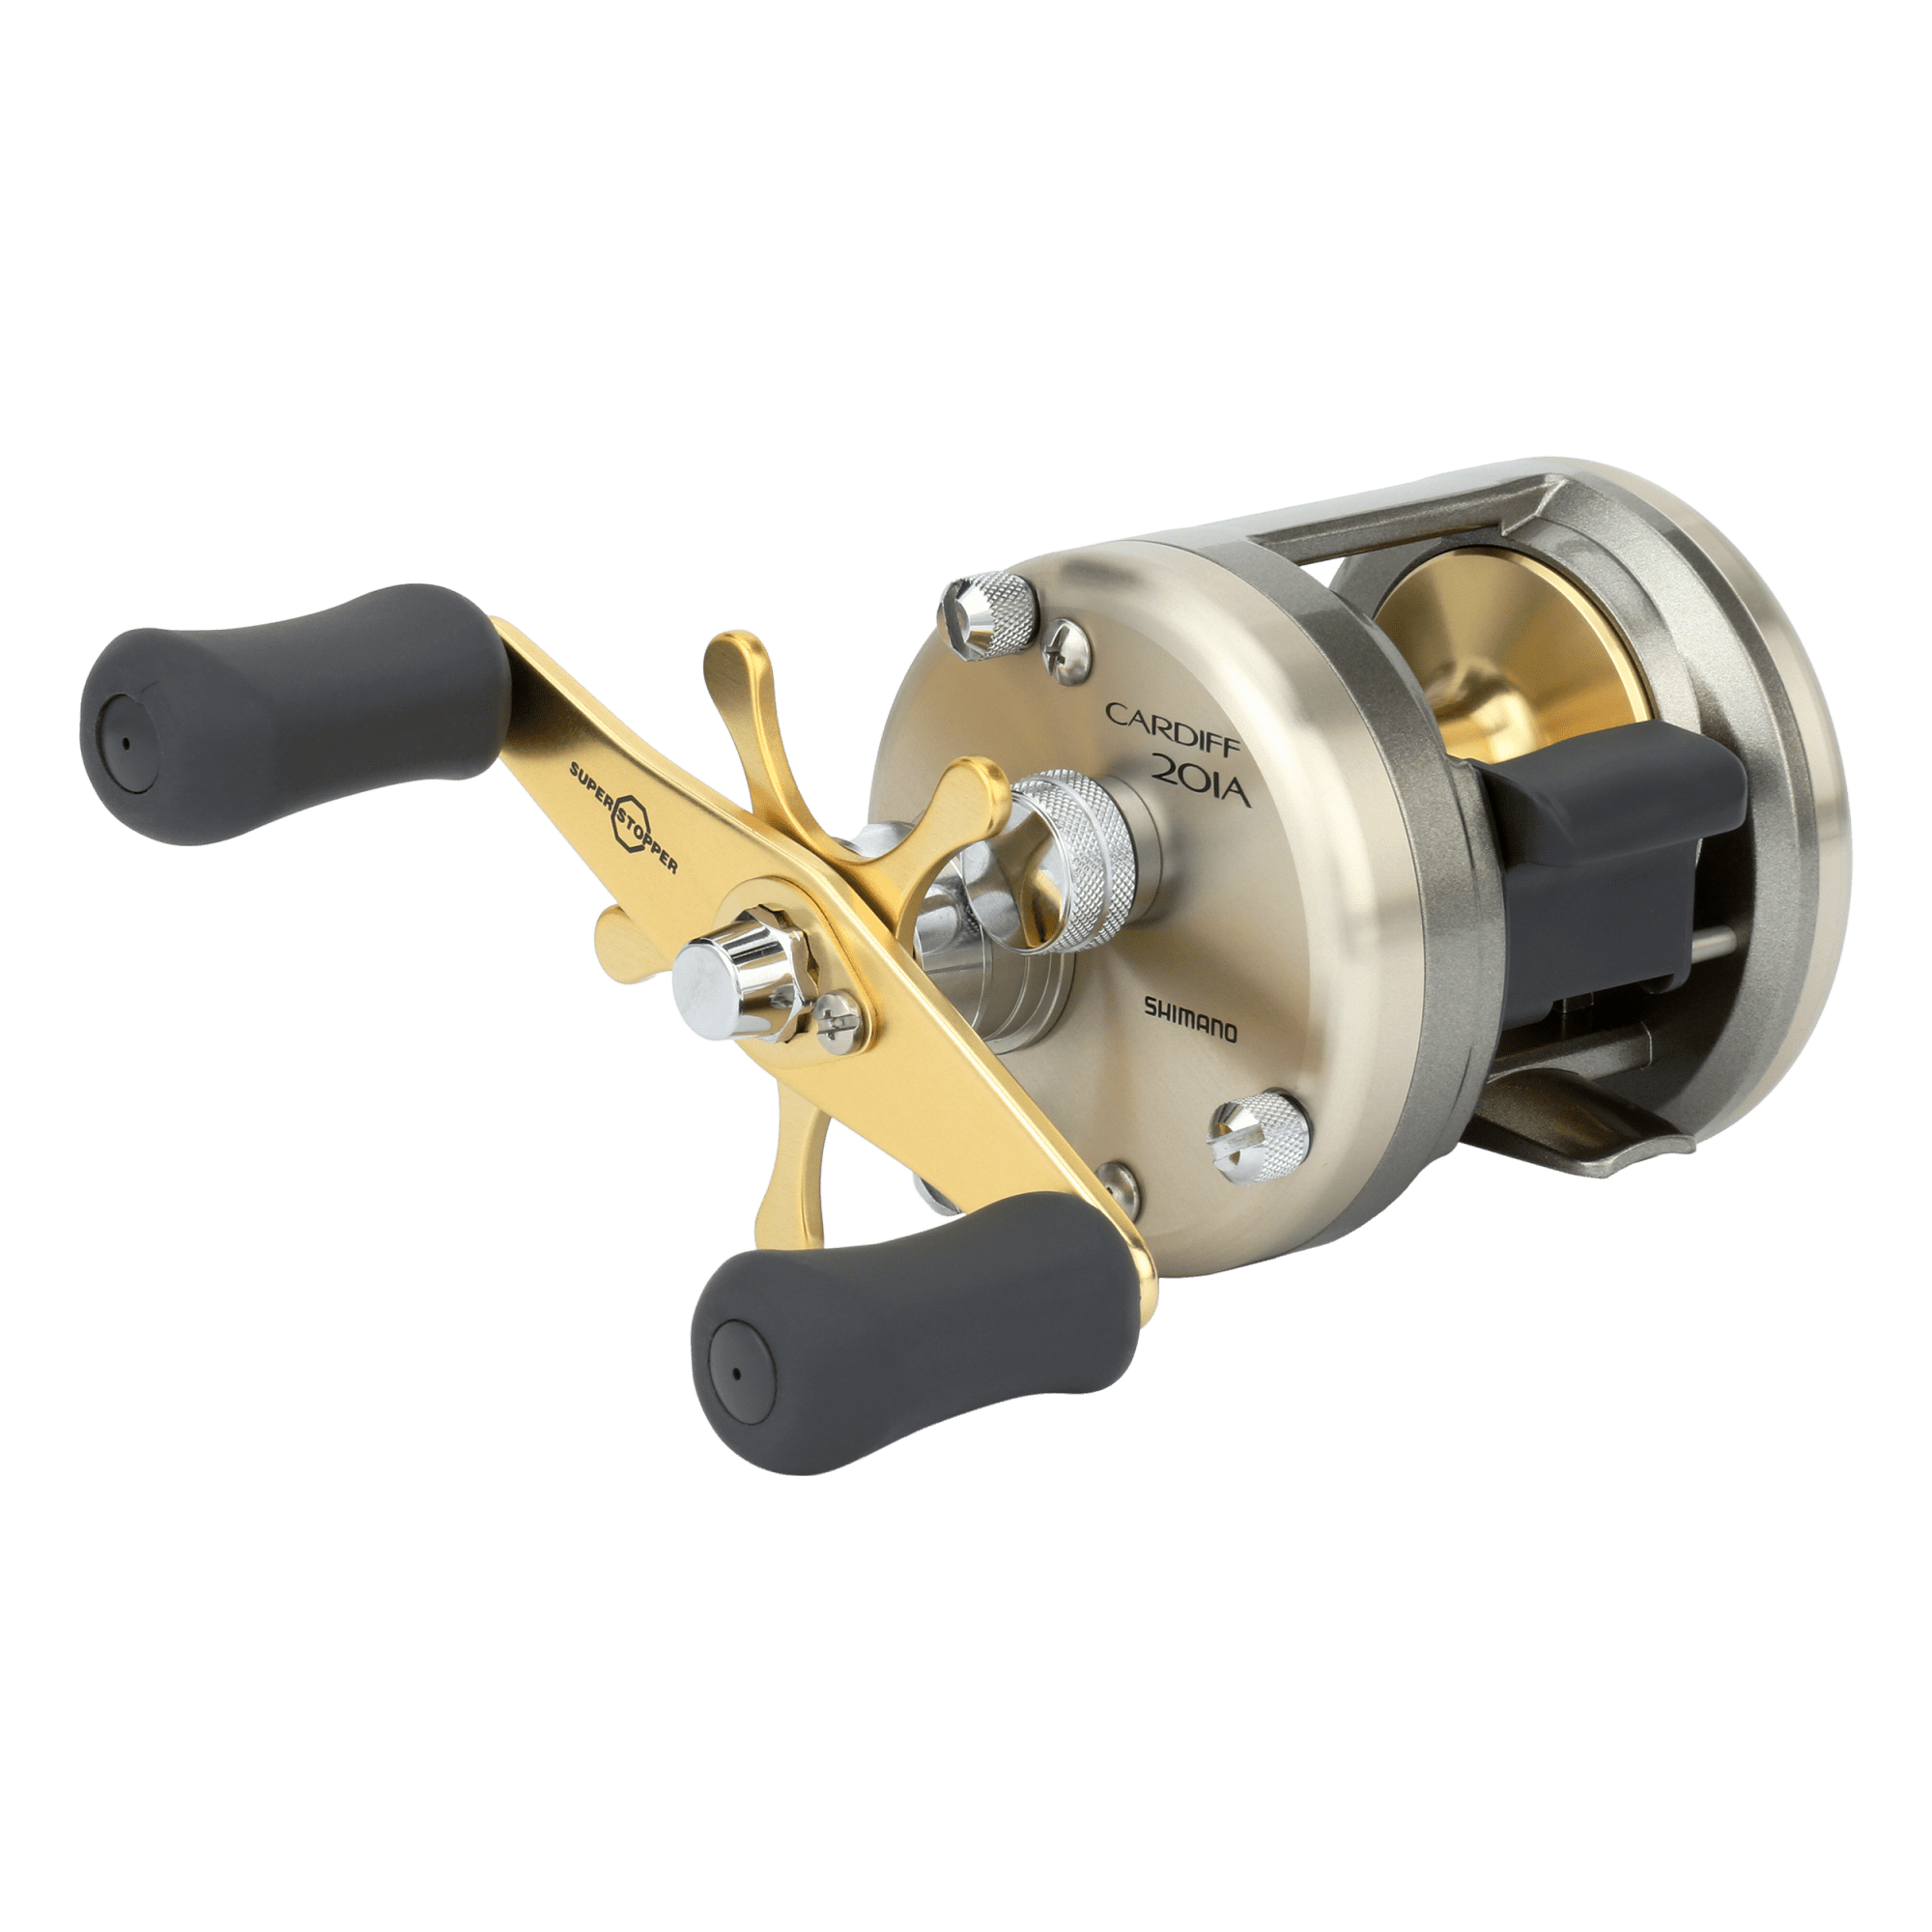 Shimano Fishing CARDIFF 400A Round Reels [CDF400A]